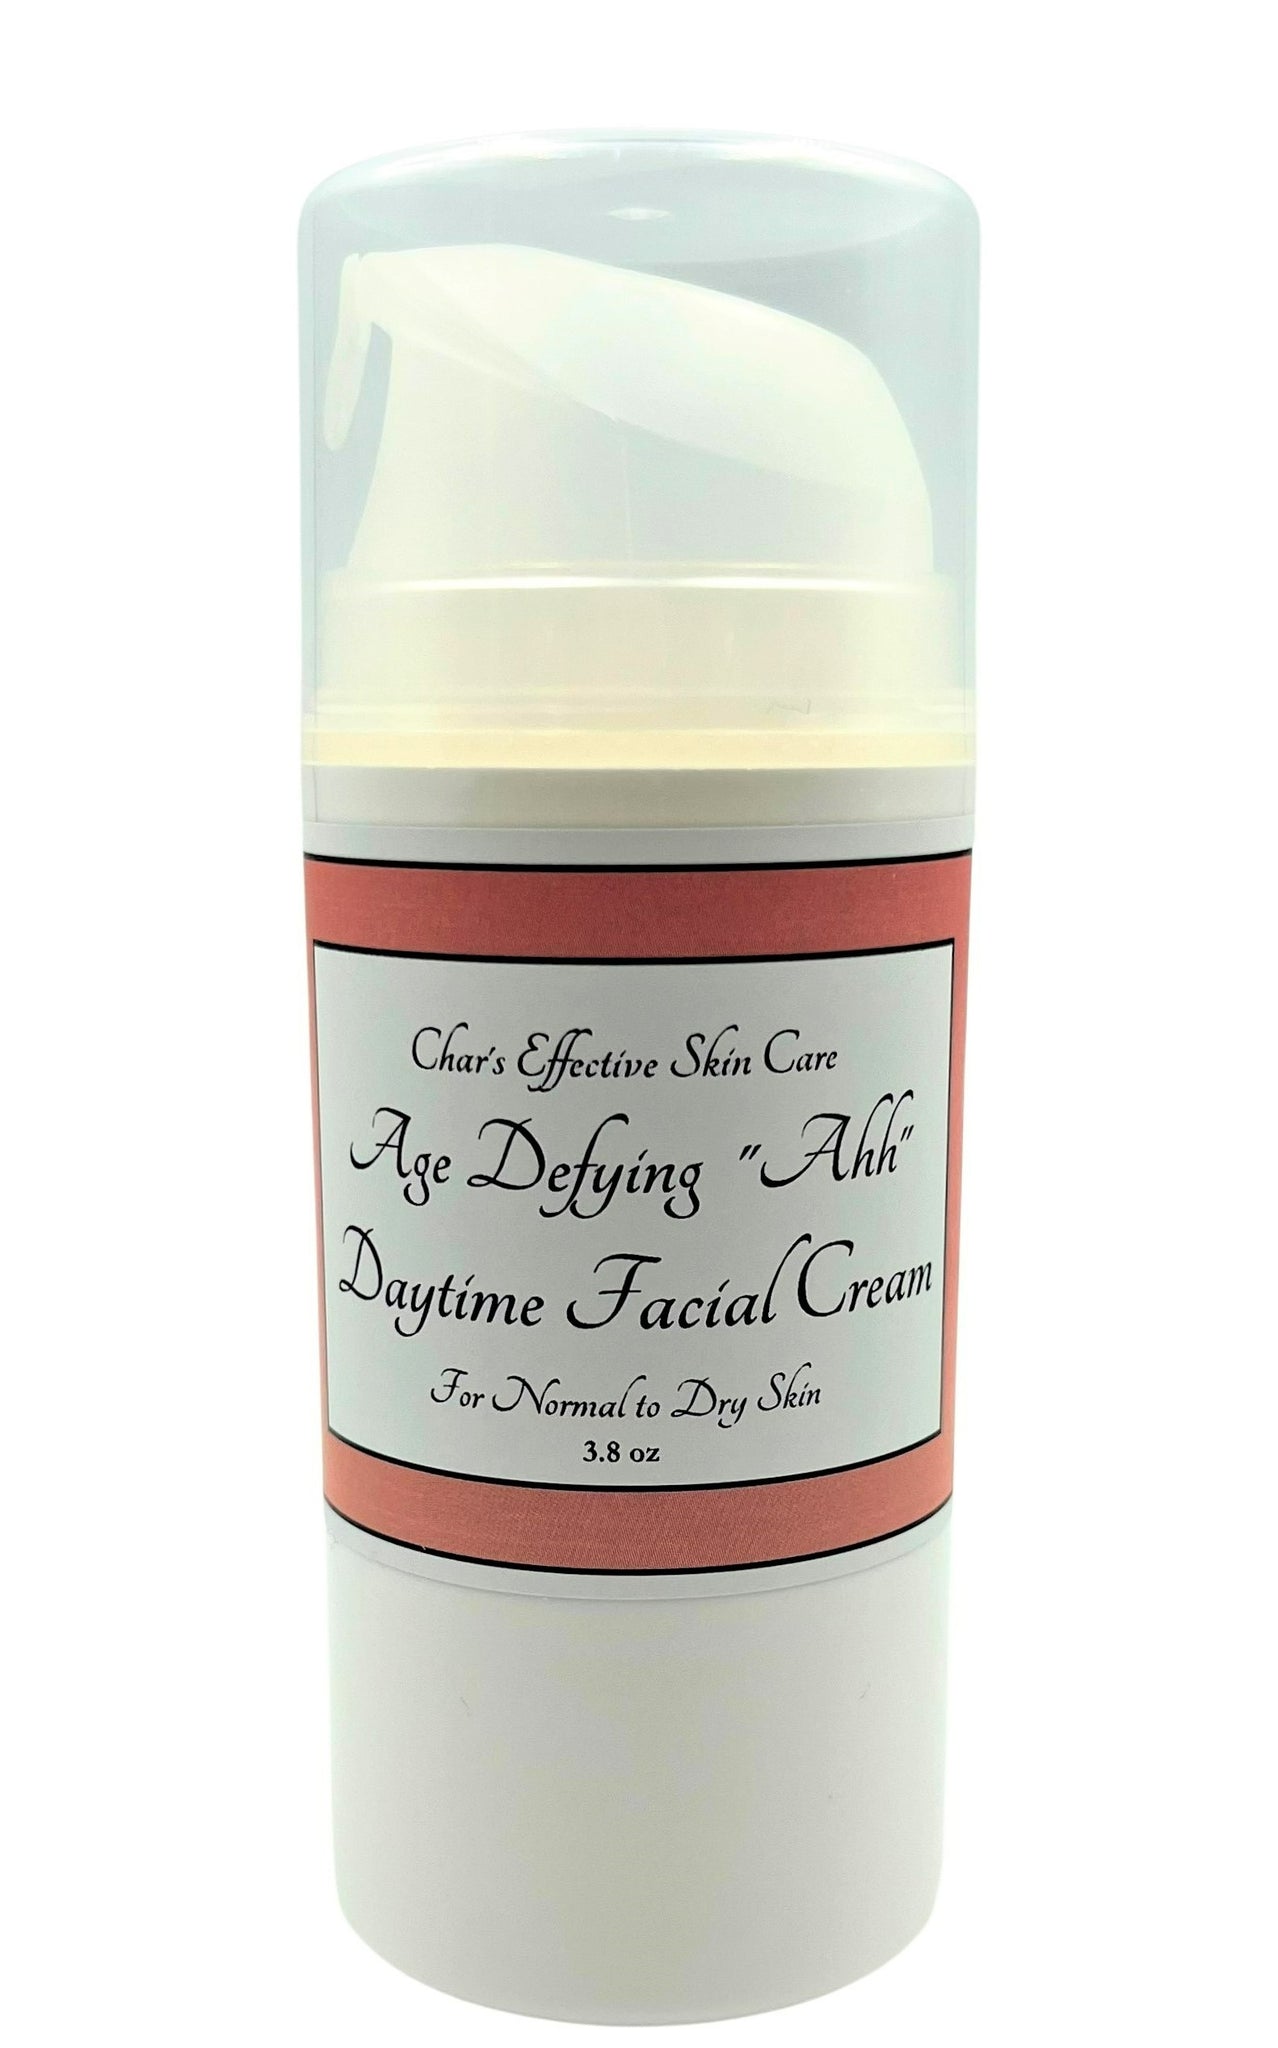 Age Defying "AHH" Facial Day Cream Moisturizer/For Normal to Dry Skin/ White Airless Pump Bottle in 3.8 oz / Many Botanical Antioxidants include White Tea, Centella Asiatica with anti-aging Peptides, Niacinamide, Hyaluronic Acid and Ceramides/Char's Effective Skin Care